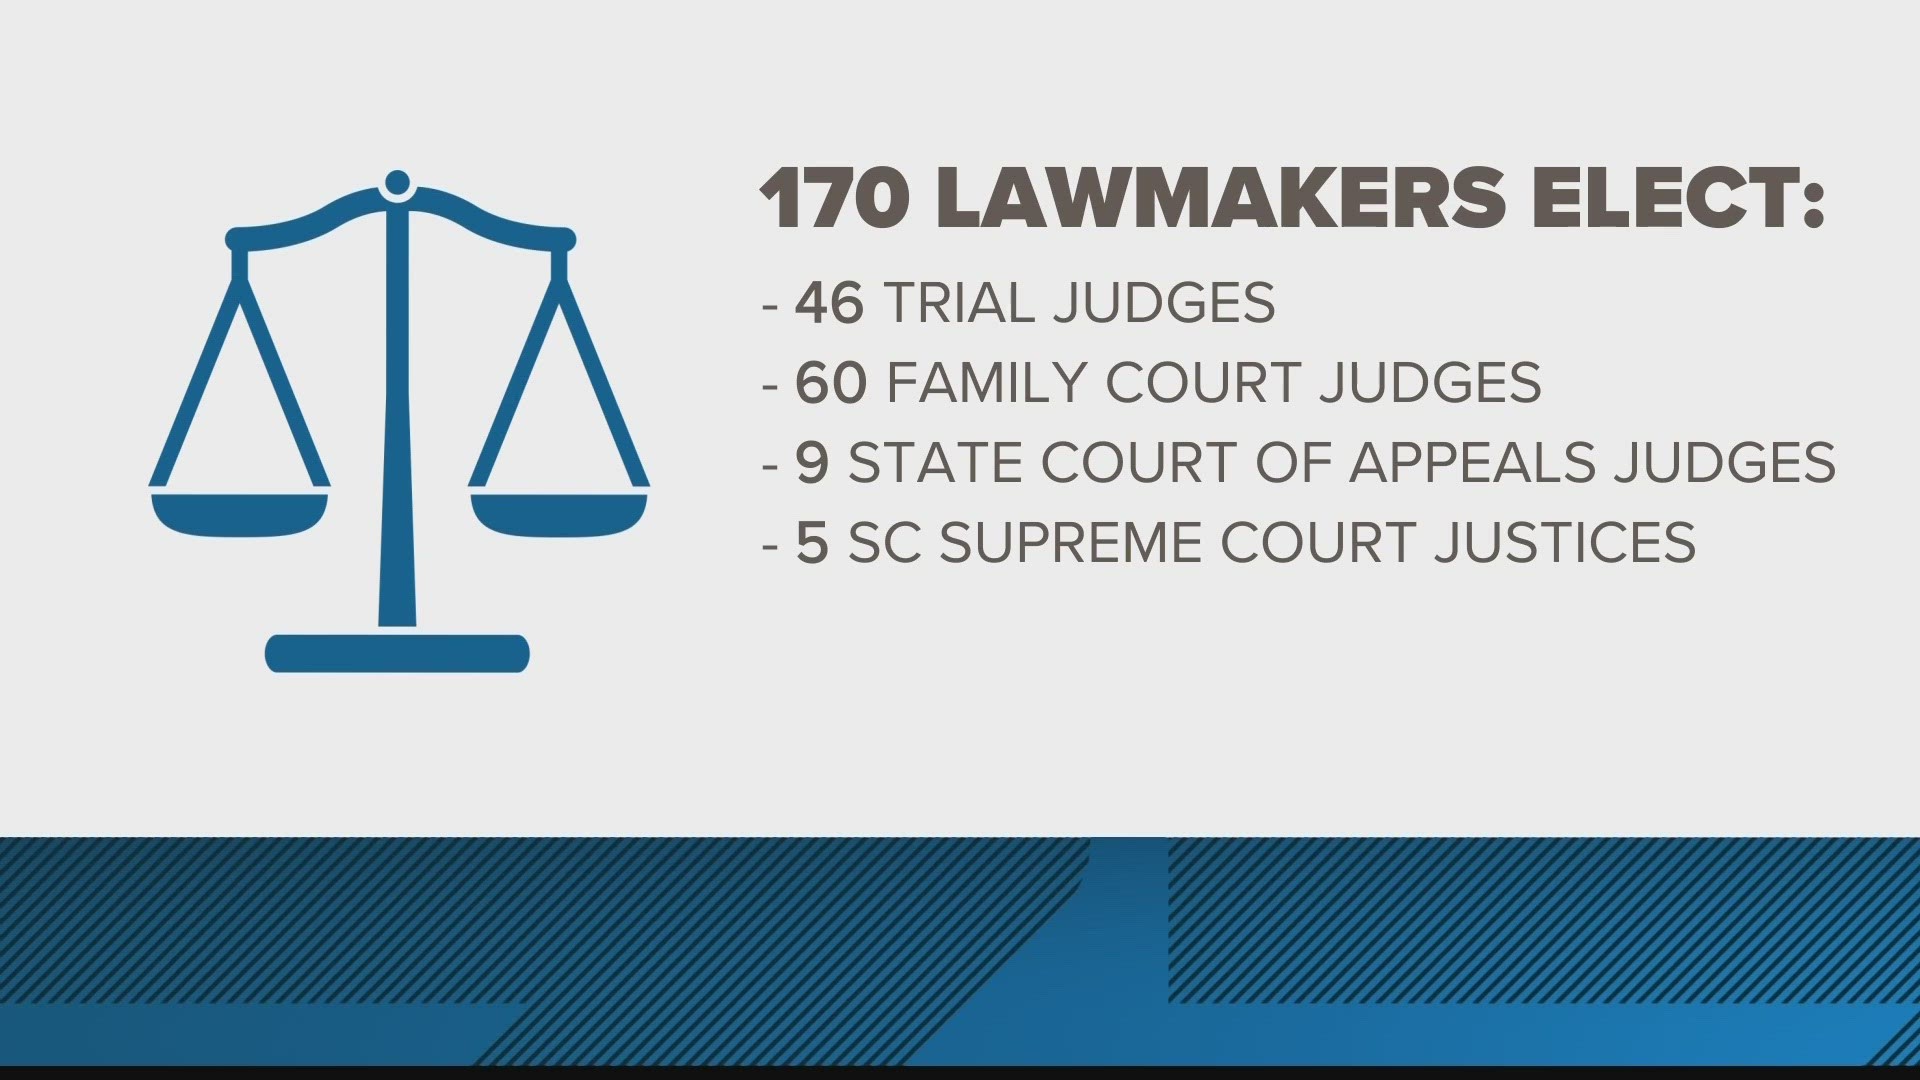 South Carolina is one of two states where lawmakers select judges.